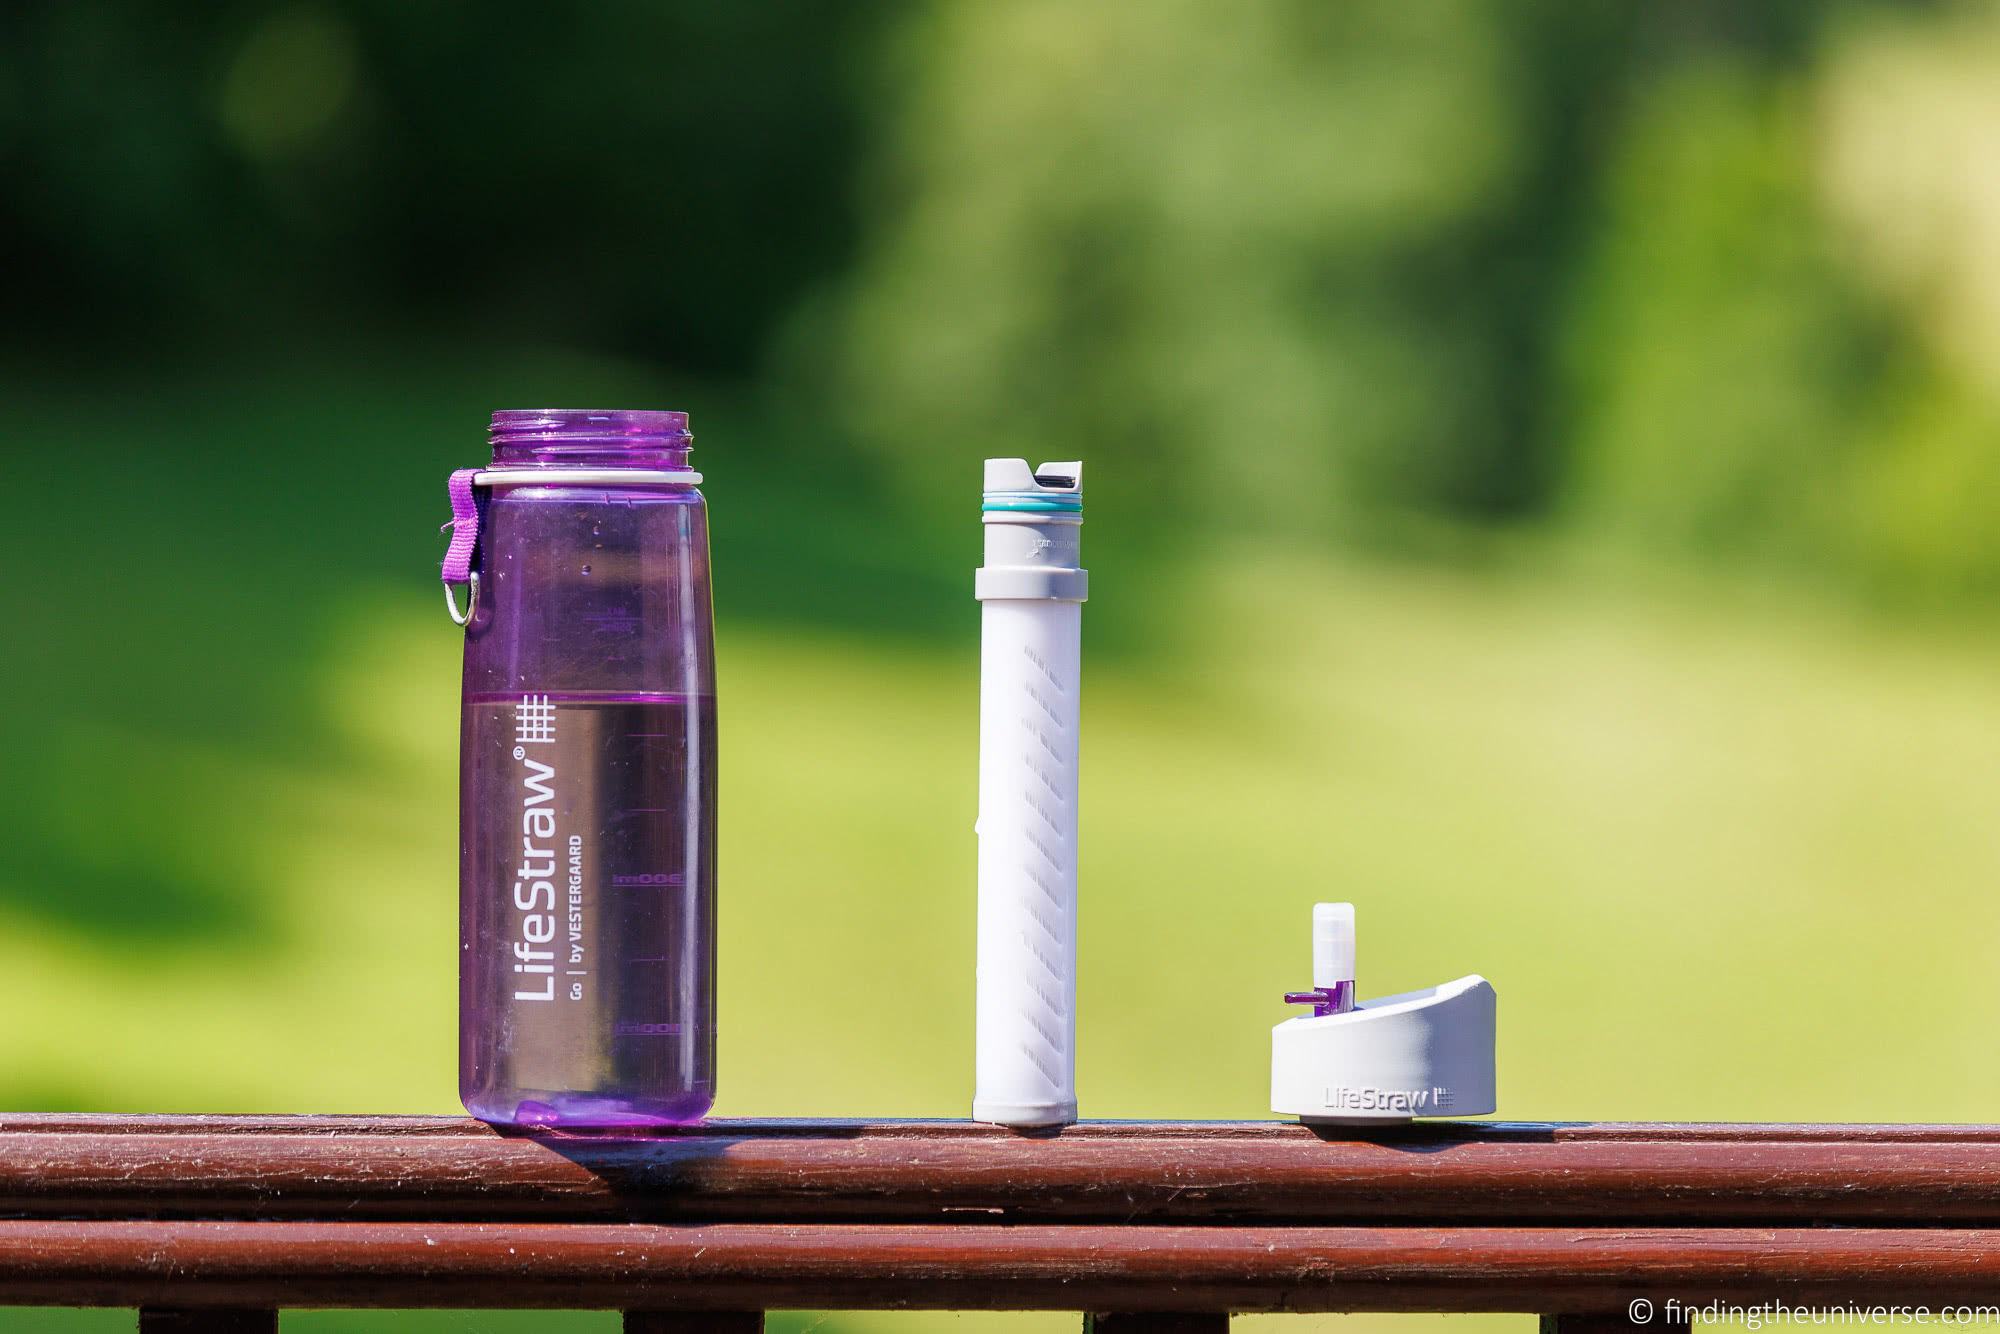 https://www.findingtheuniverse.com/wp-content/uploads/2022/06/Lifestraw-Go_by_Laurence-Norah.jpg